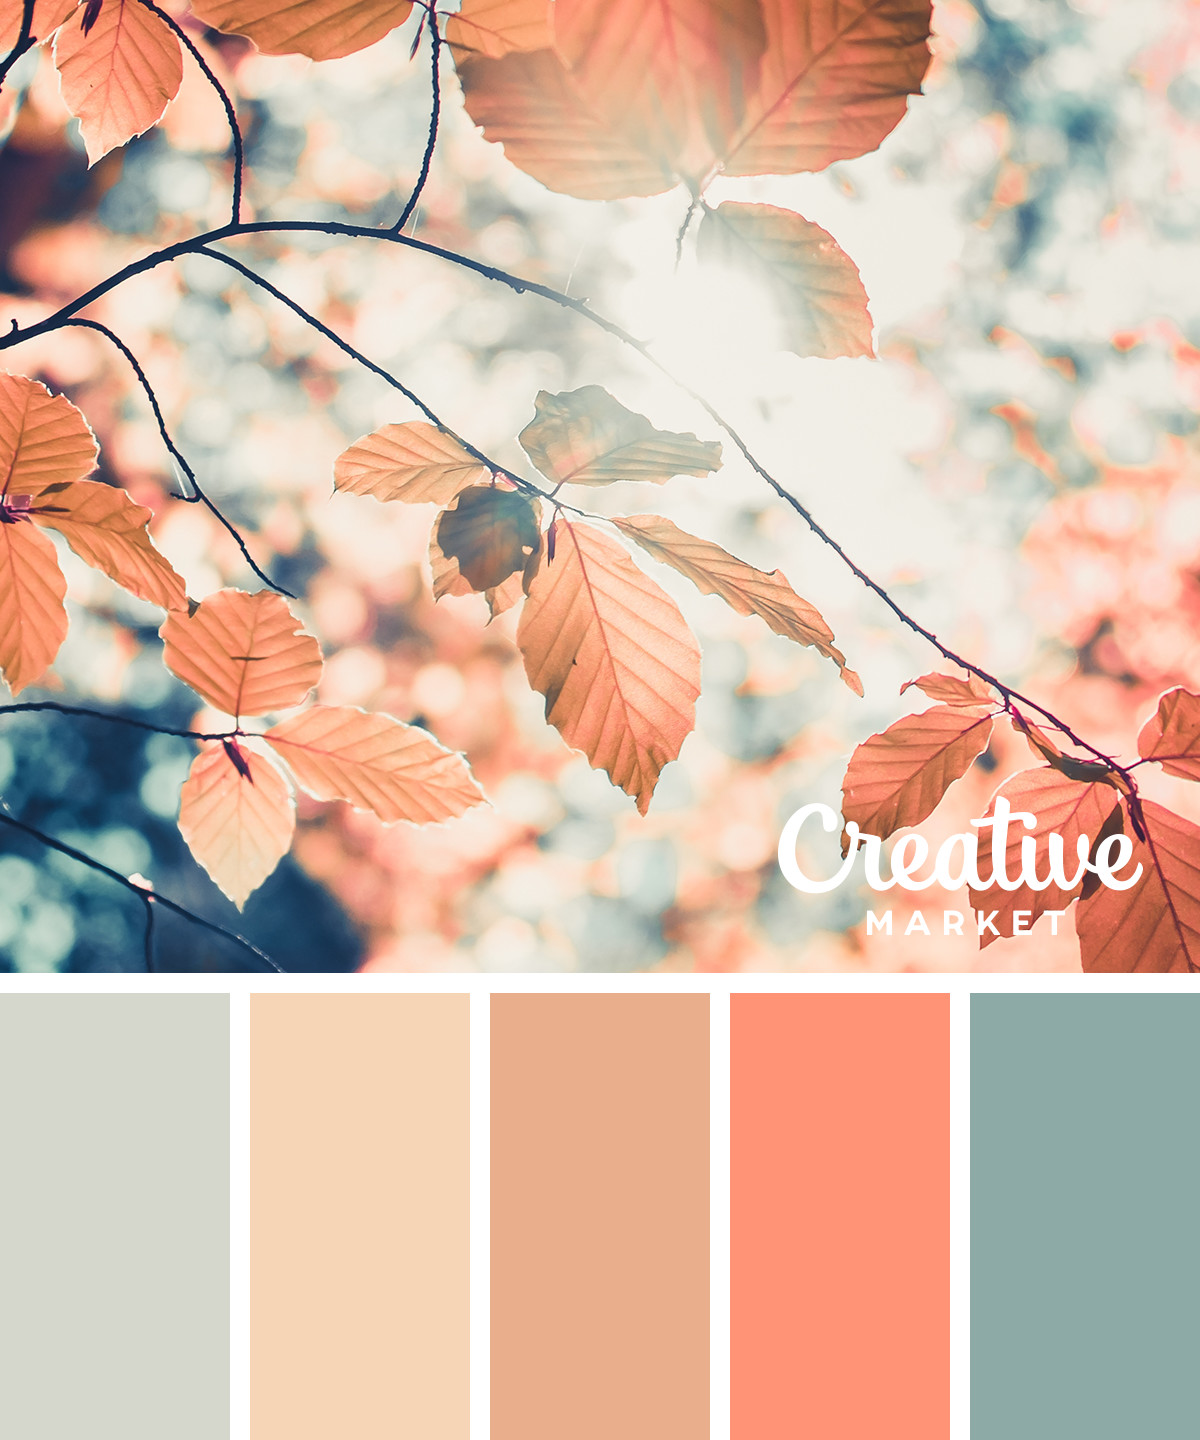 15 Downloadable Color Palettes For Fall - Creative Market Blog